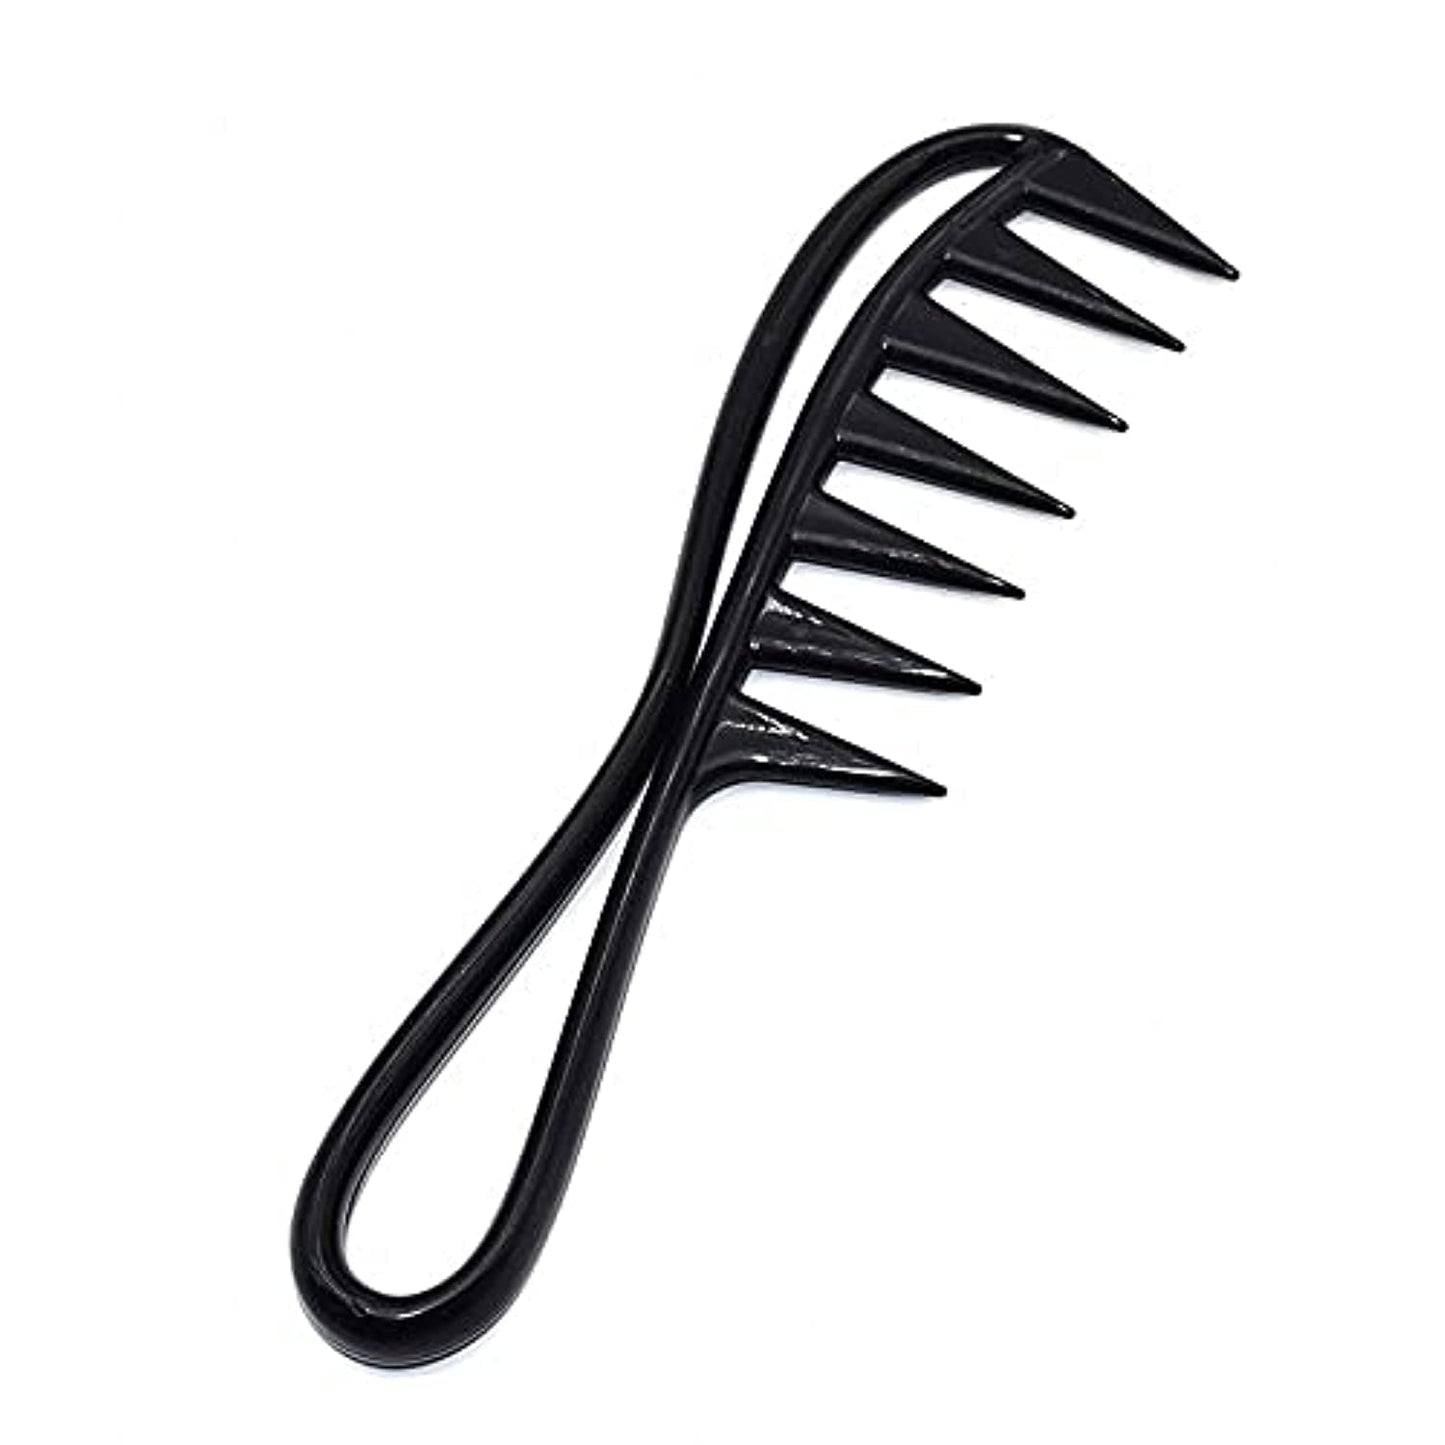 Bliss- wide tooth comb Unisex Hair Comb Hairstyle Wavy Long Curly Hair Care Detangling Wide Teeth Brush Hairdressing Styling Tool